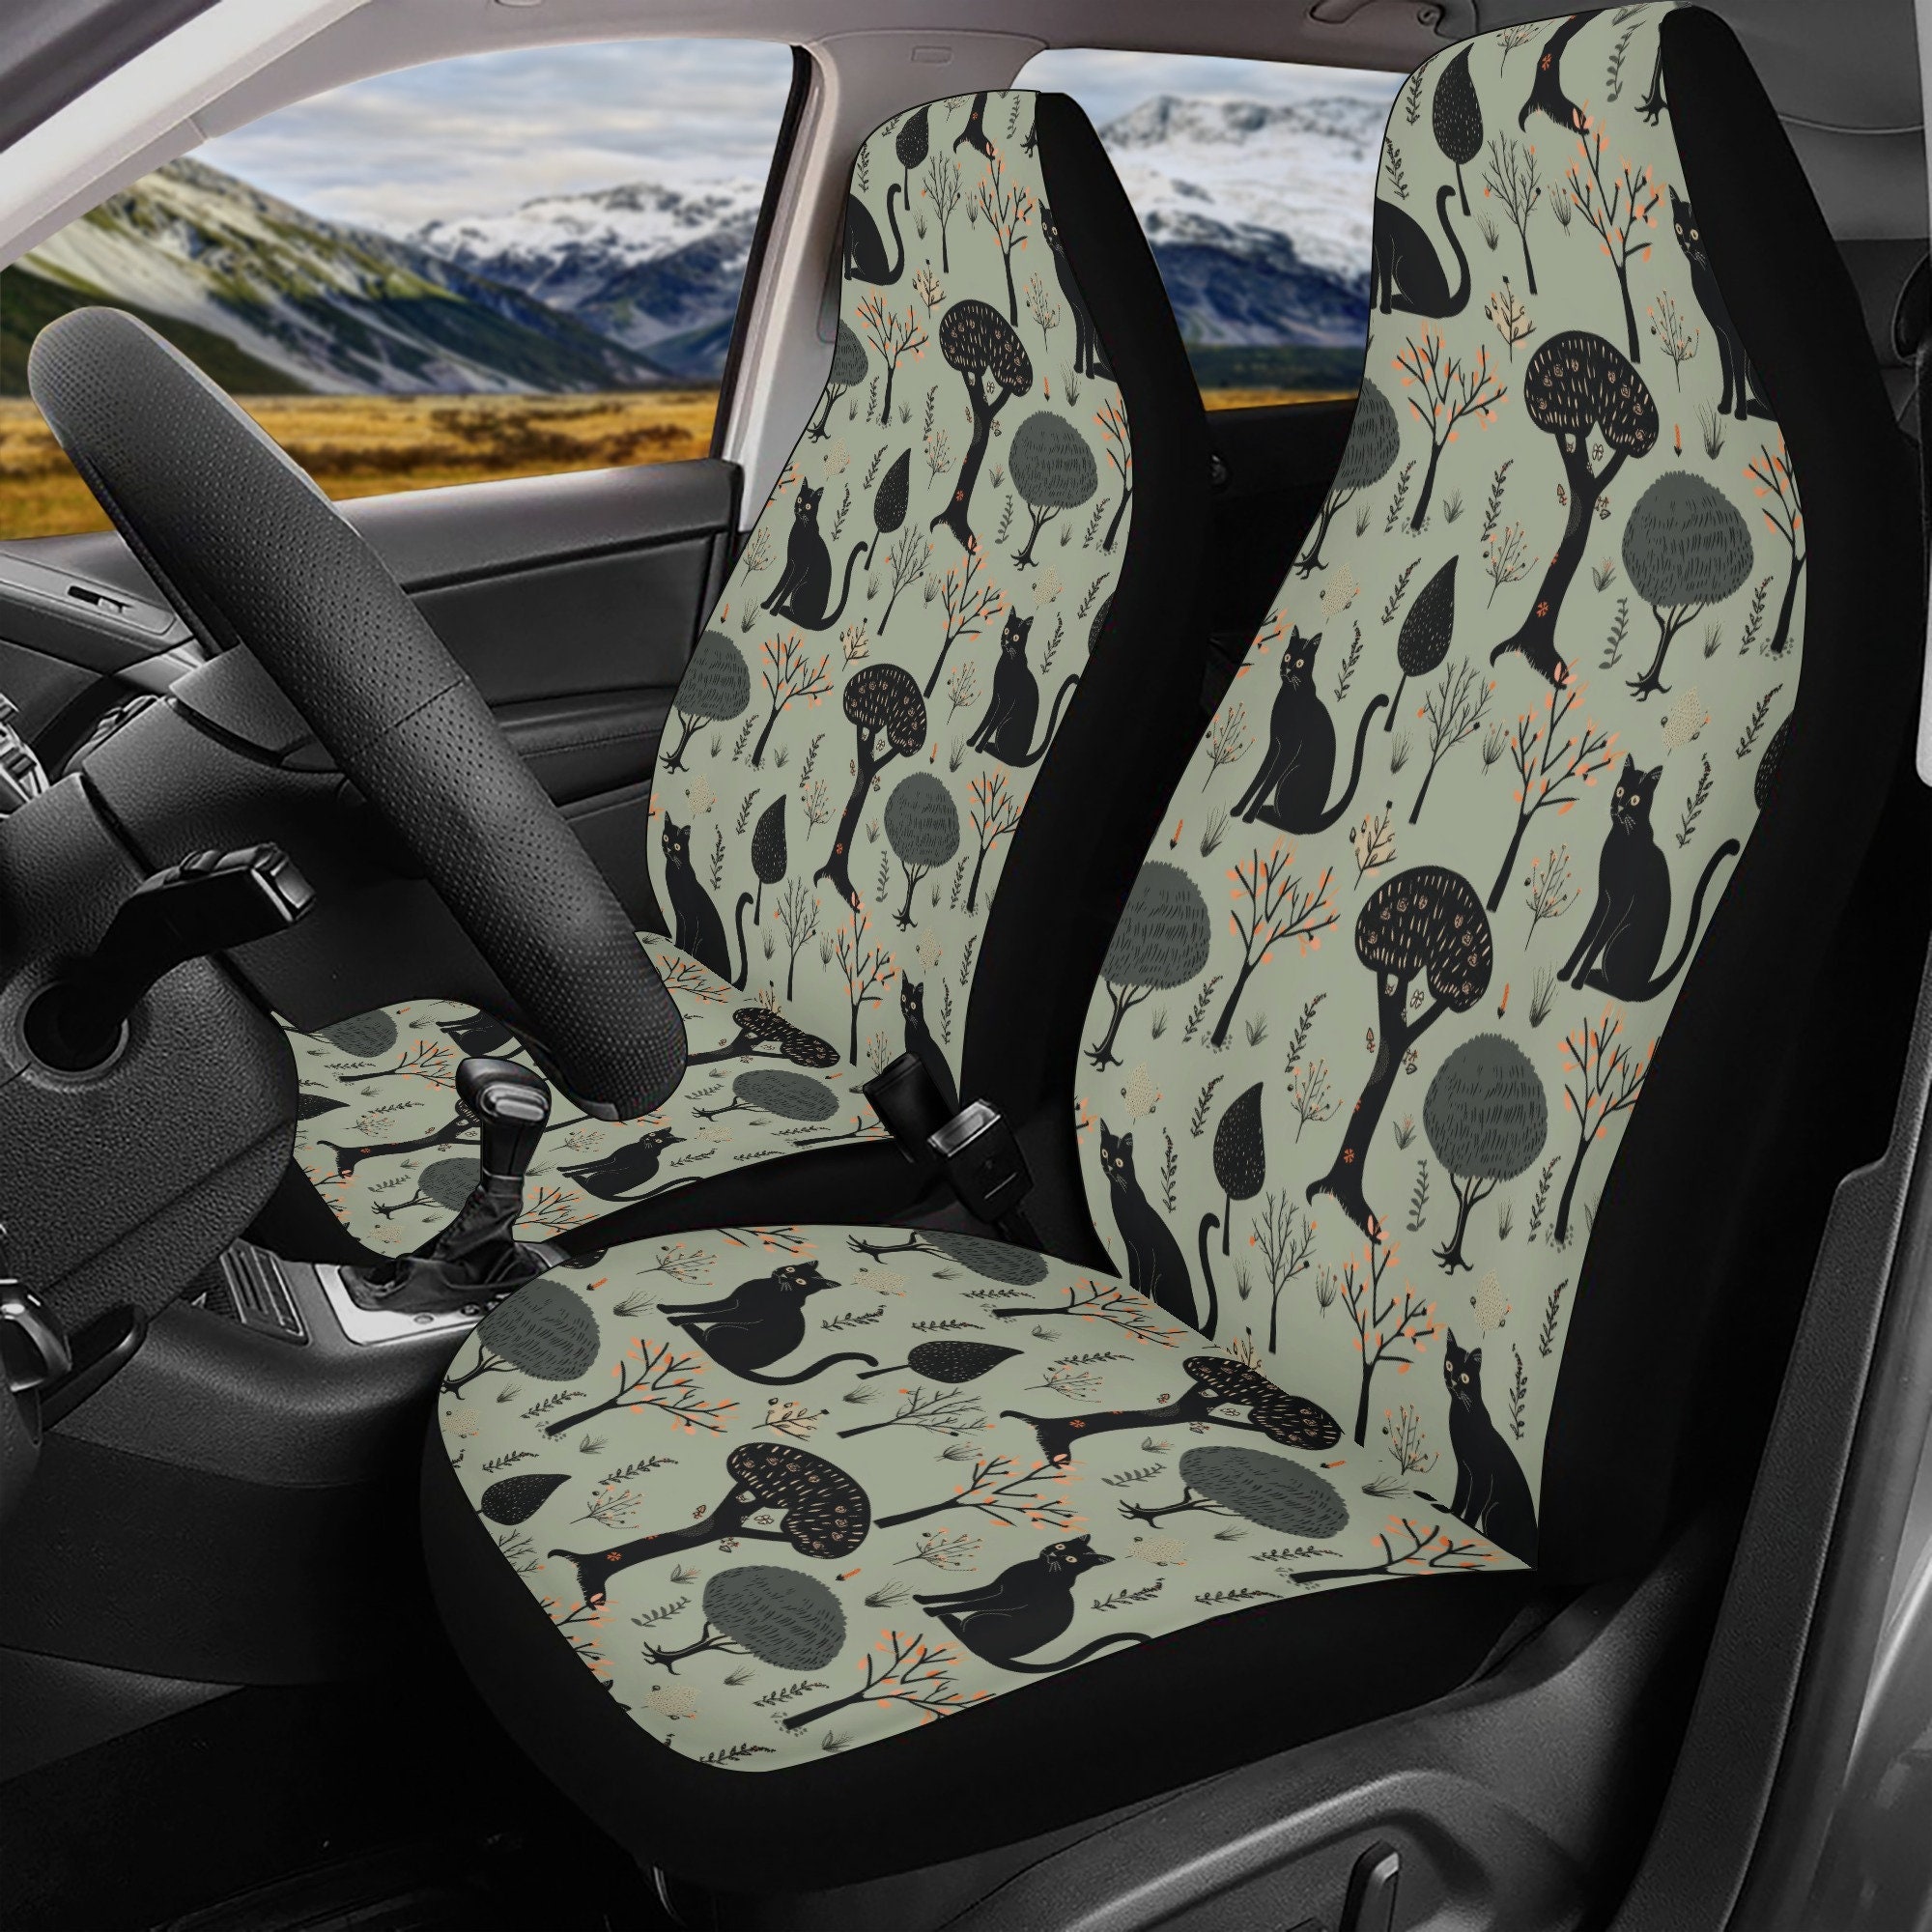 Black Cat Forest Car Seat Covers Full Set, Cottagecore Cat Front And Back Seat Covers For Vehicle, Steering Wheel Cover, Car Decor Gift